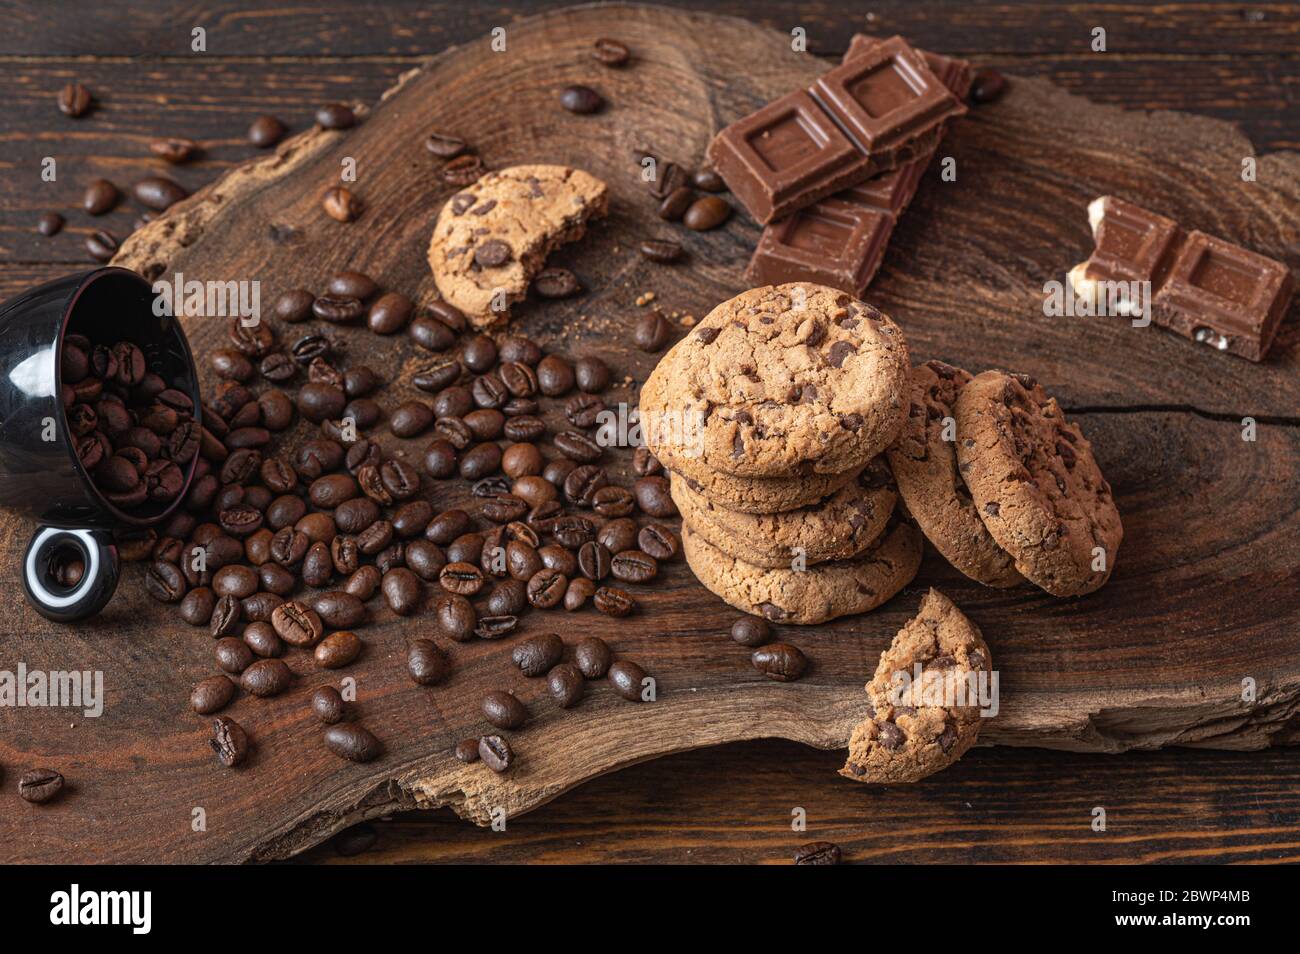 Cookies, pieces of chocolate and coffe beans over a wooden board Stock Photo